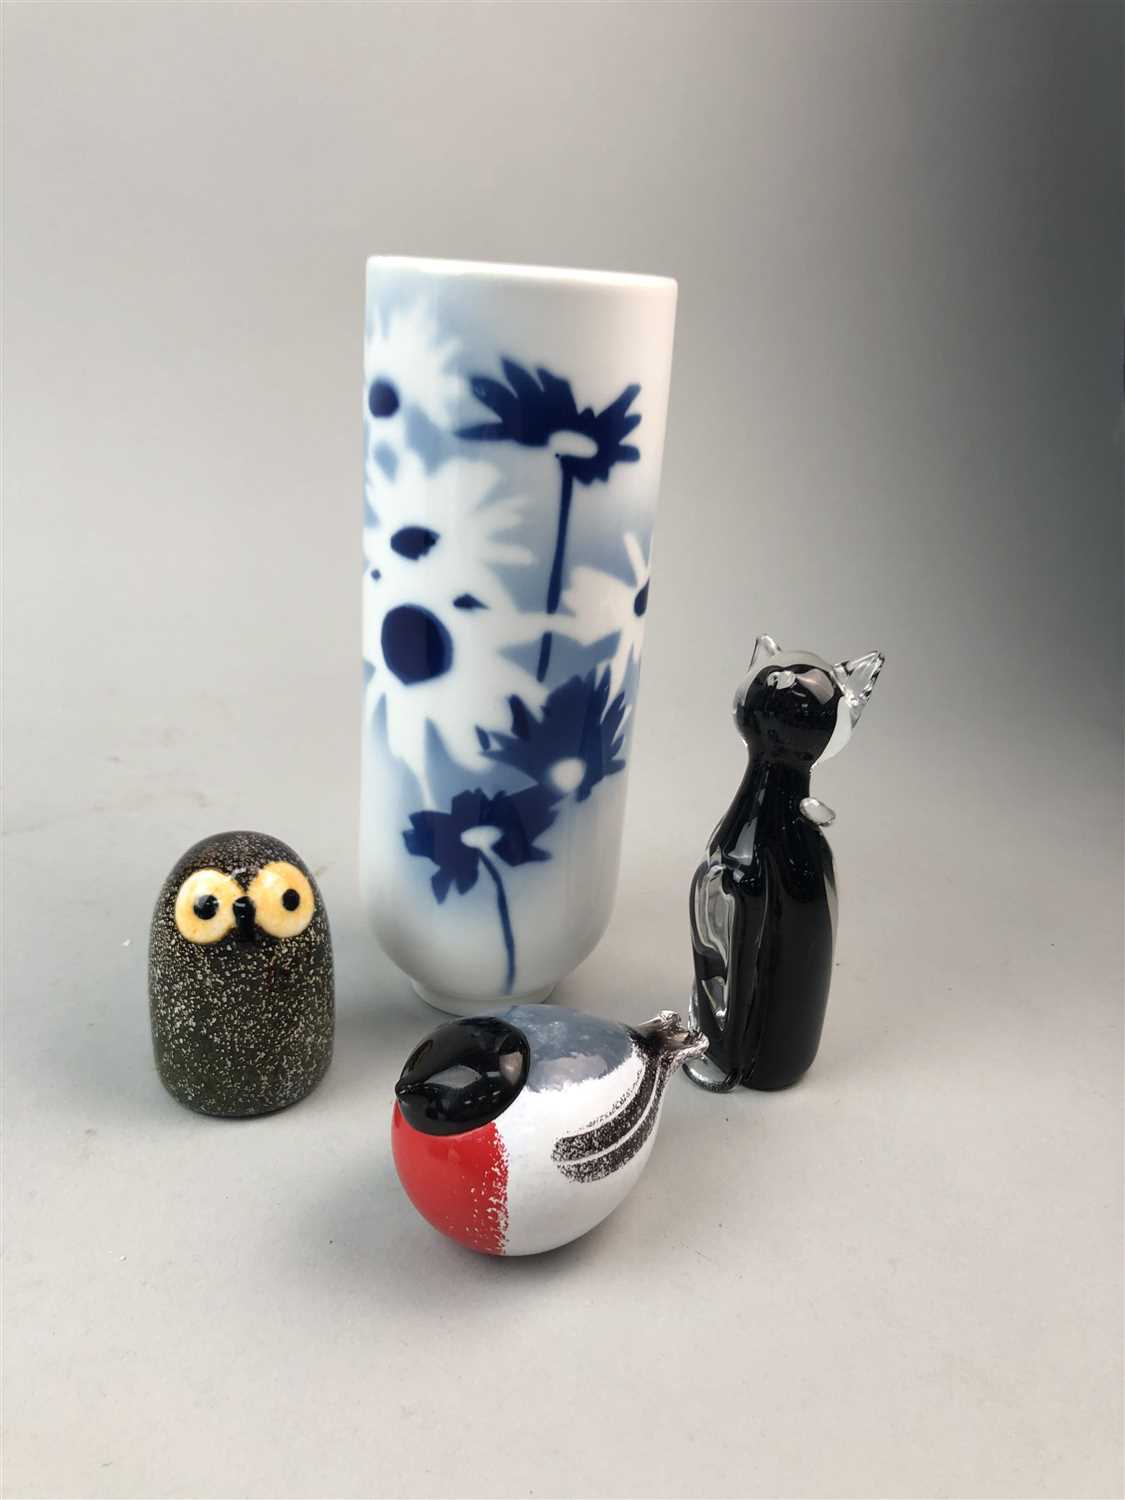 Lot 94 - A ROYAL COPENHAGEN WALL VASE AND CERAMIC AND GLASS ANIMAL FIGURES